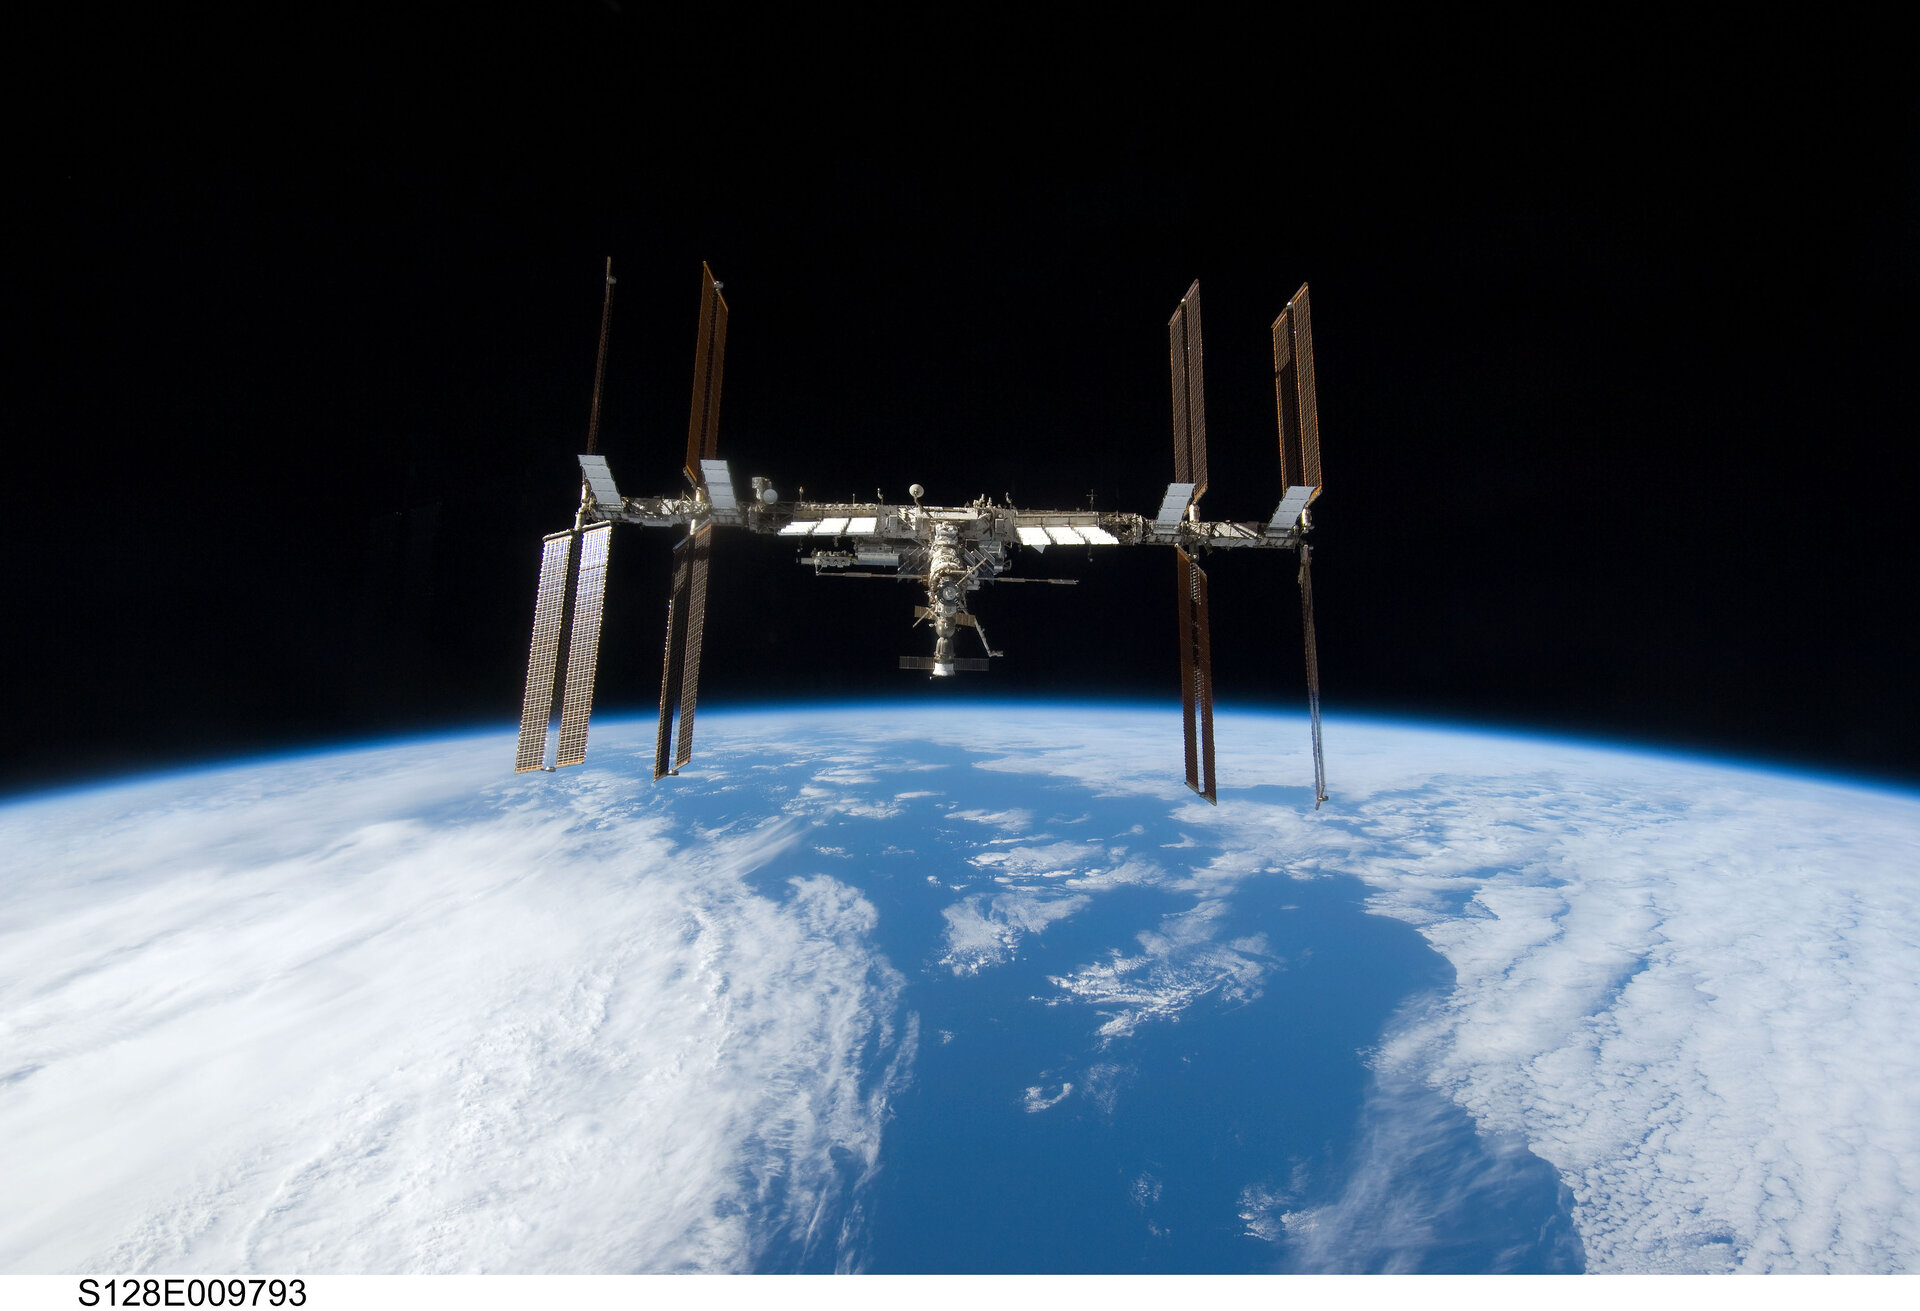 The International Space Station seen from Space Shuttle Discovery